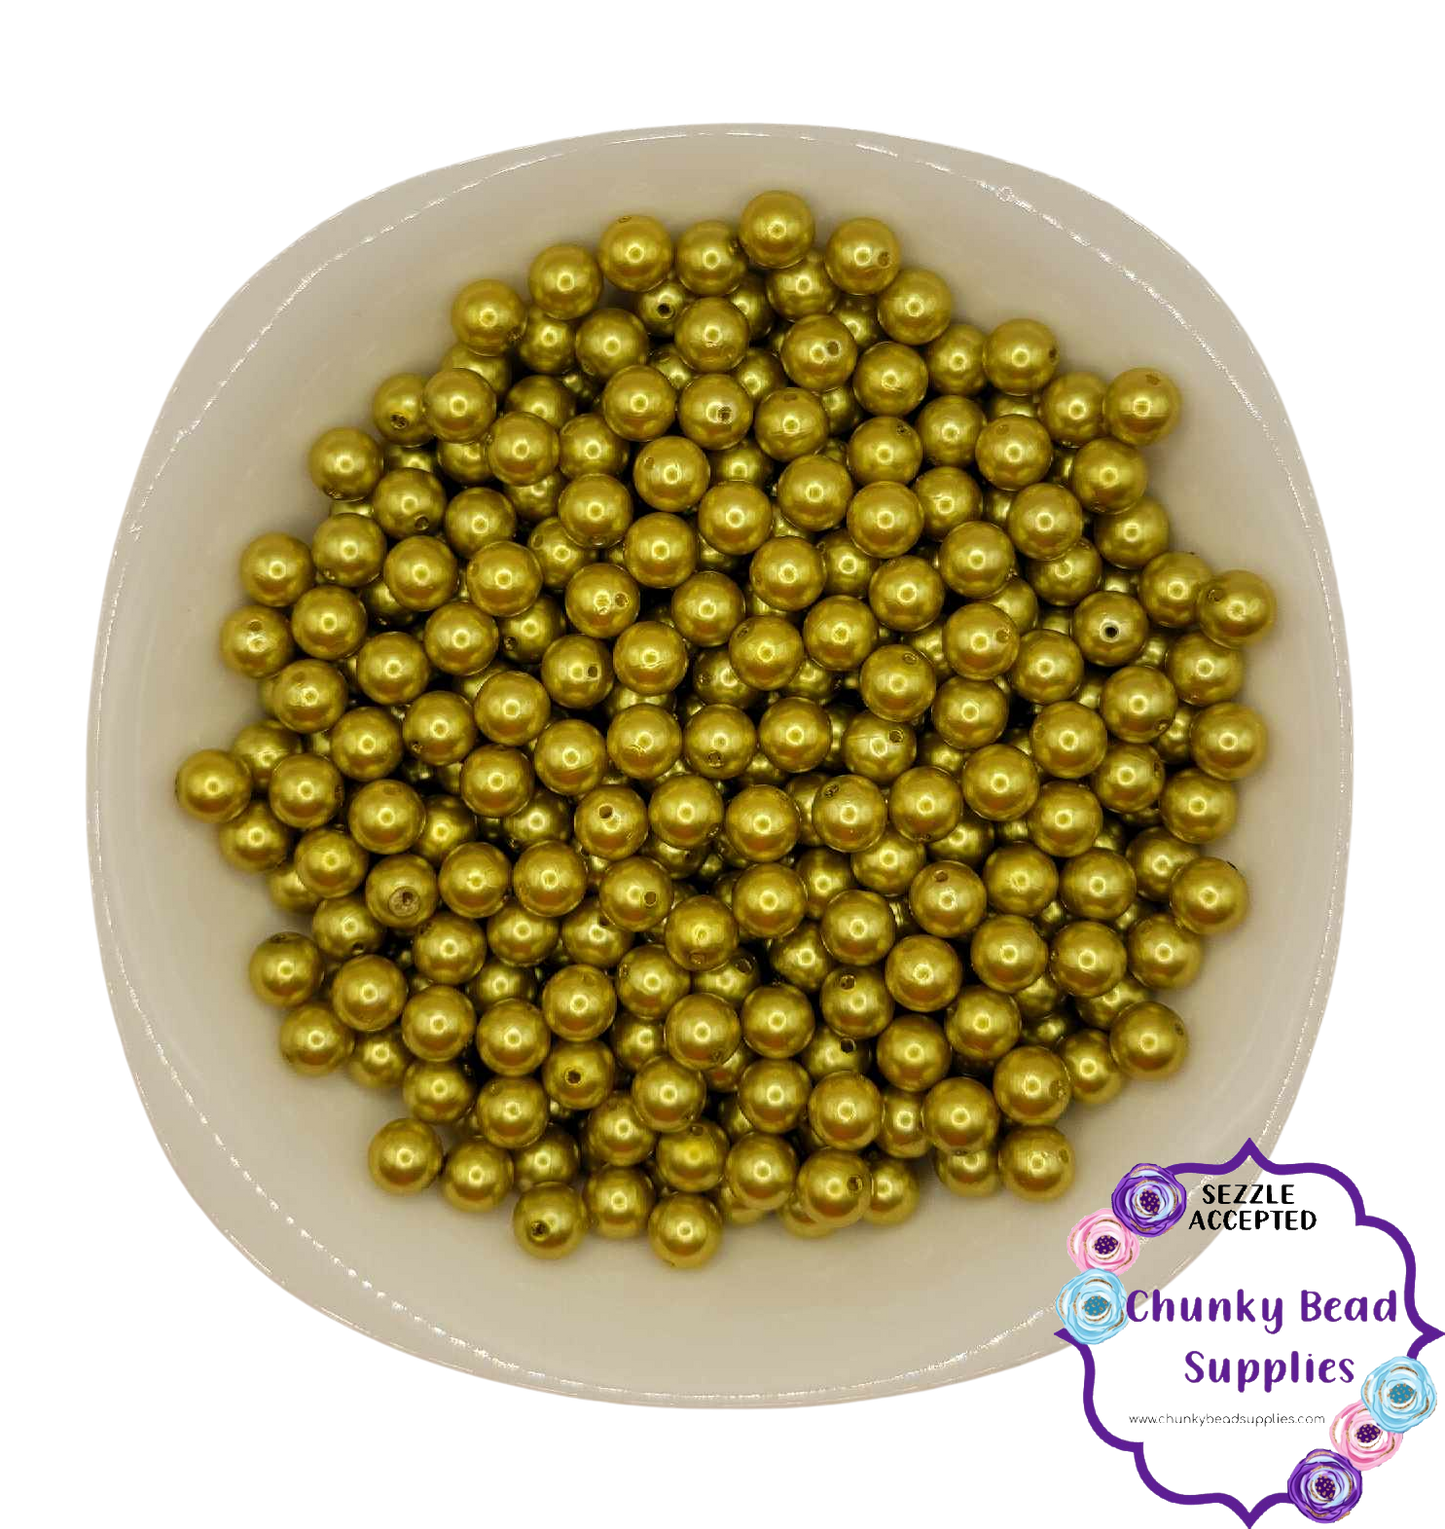 12mm “Lily Pad” Acrylic Pearl Beads